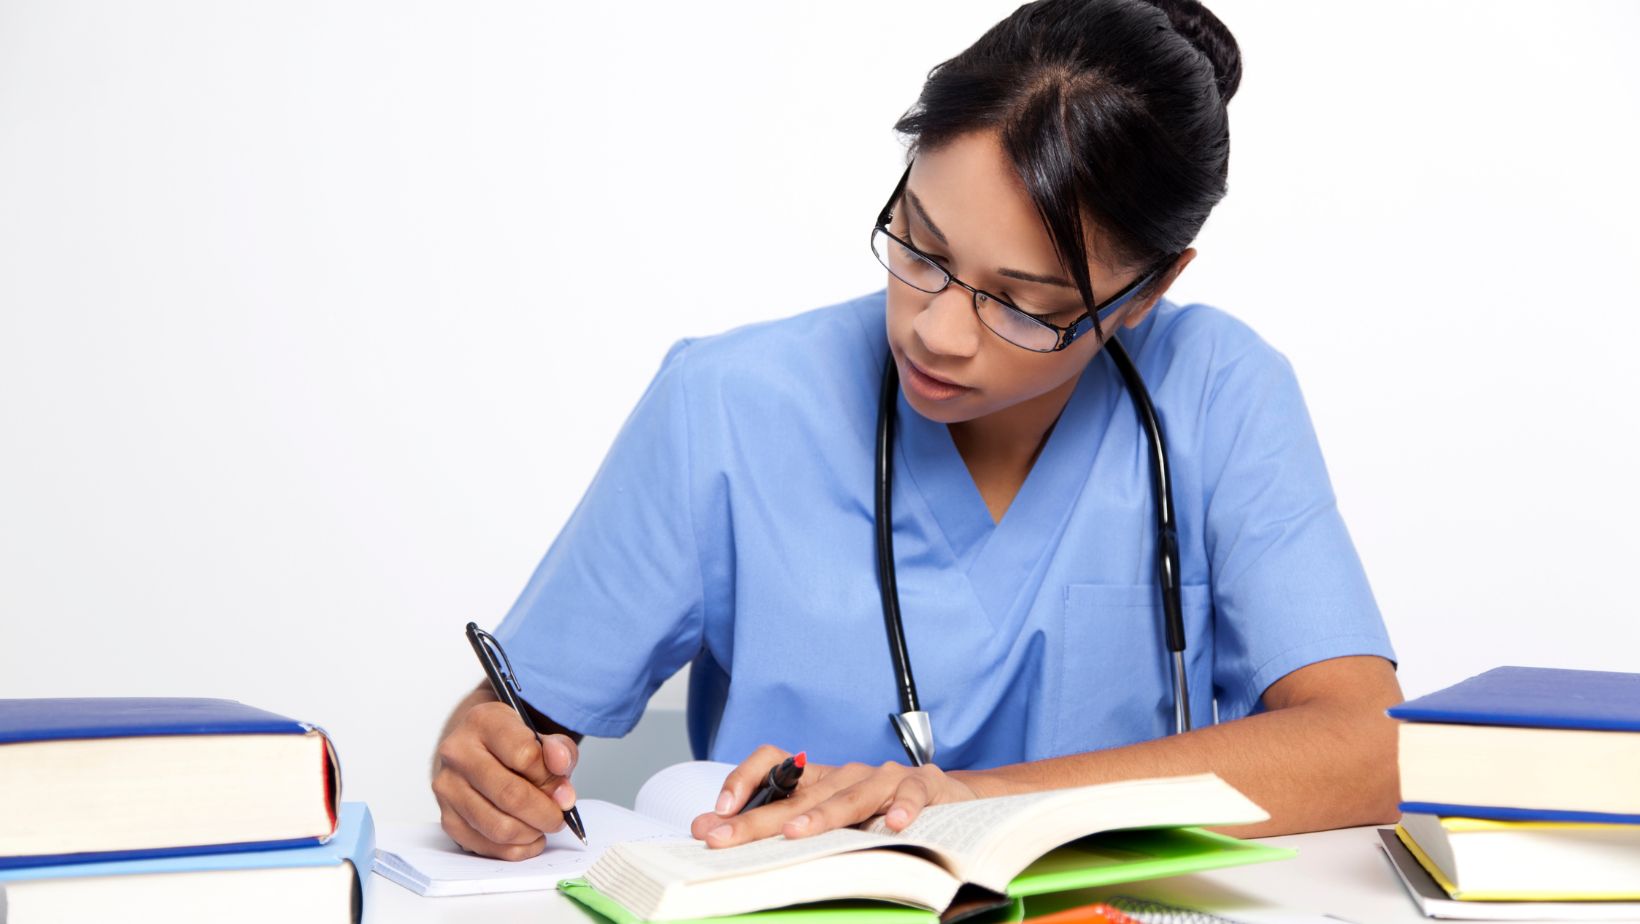 texas nursing jurisprudence exam questions and answers quizlet